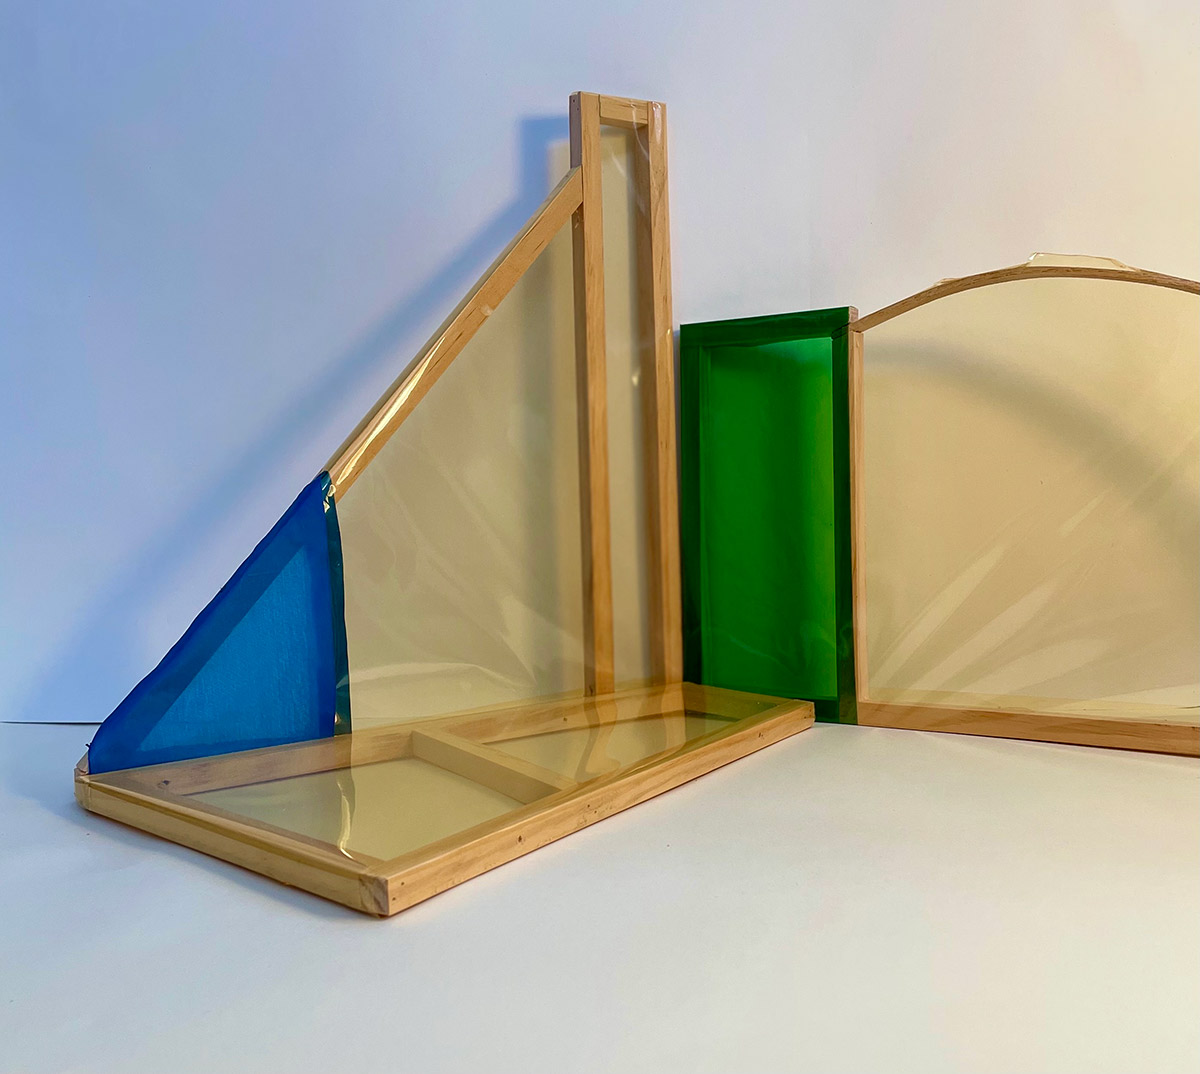 geometric structure of metal, wood, and colored transparent plastic